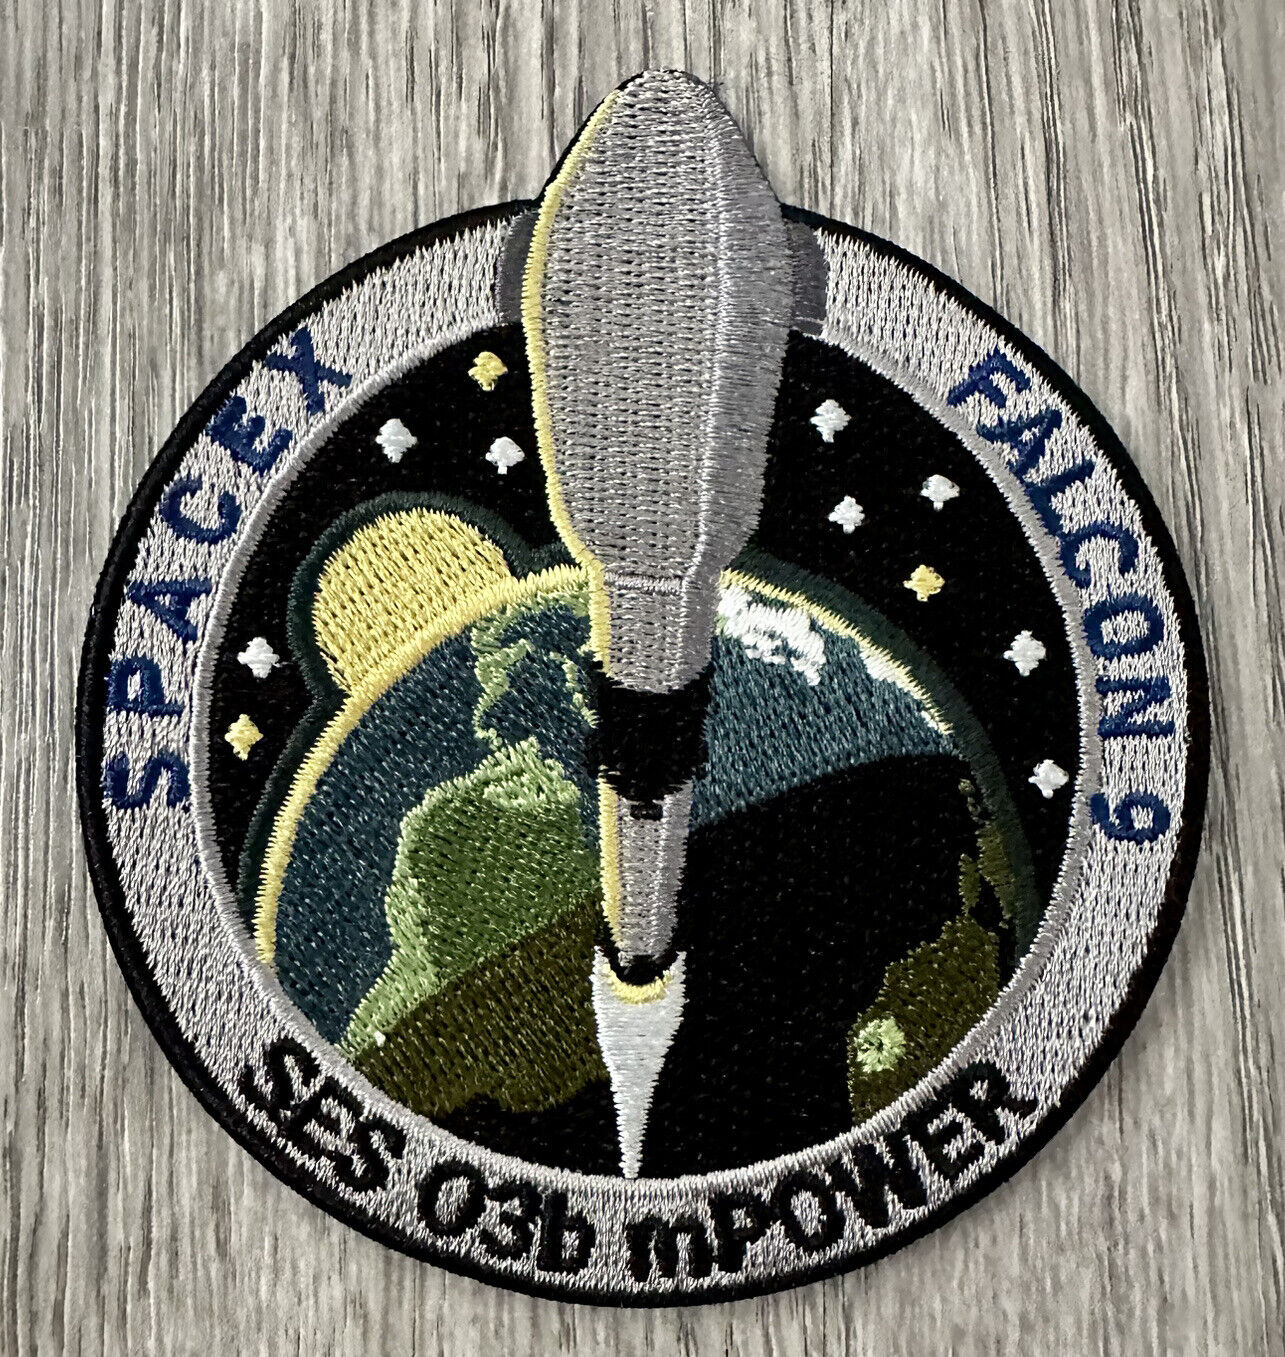 Original SpaceX SES 03b MPower Mission Patch NASA Falcon 9 3.5”